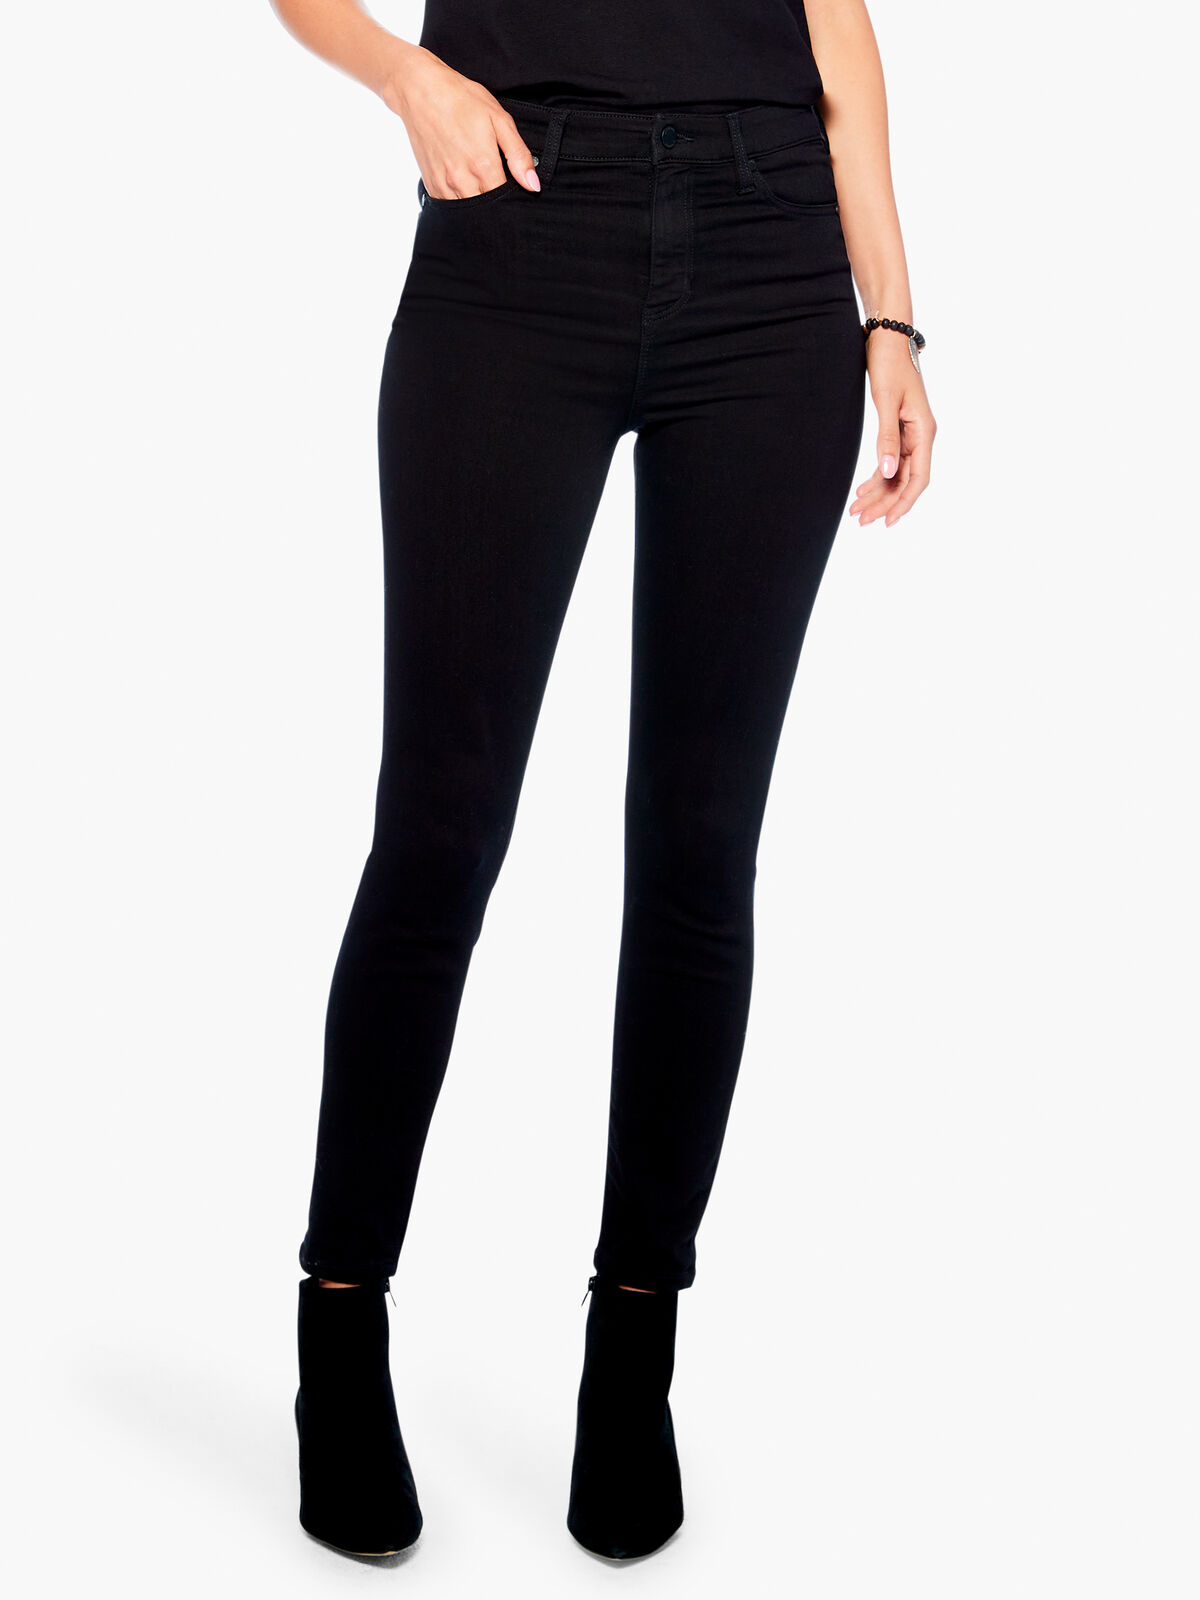 Liverpool - Abby Hi-Rise Ankle Skinny Jean